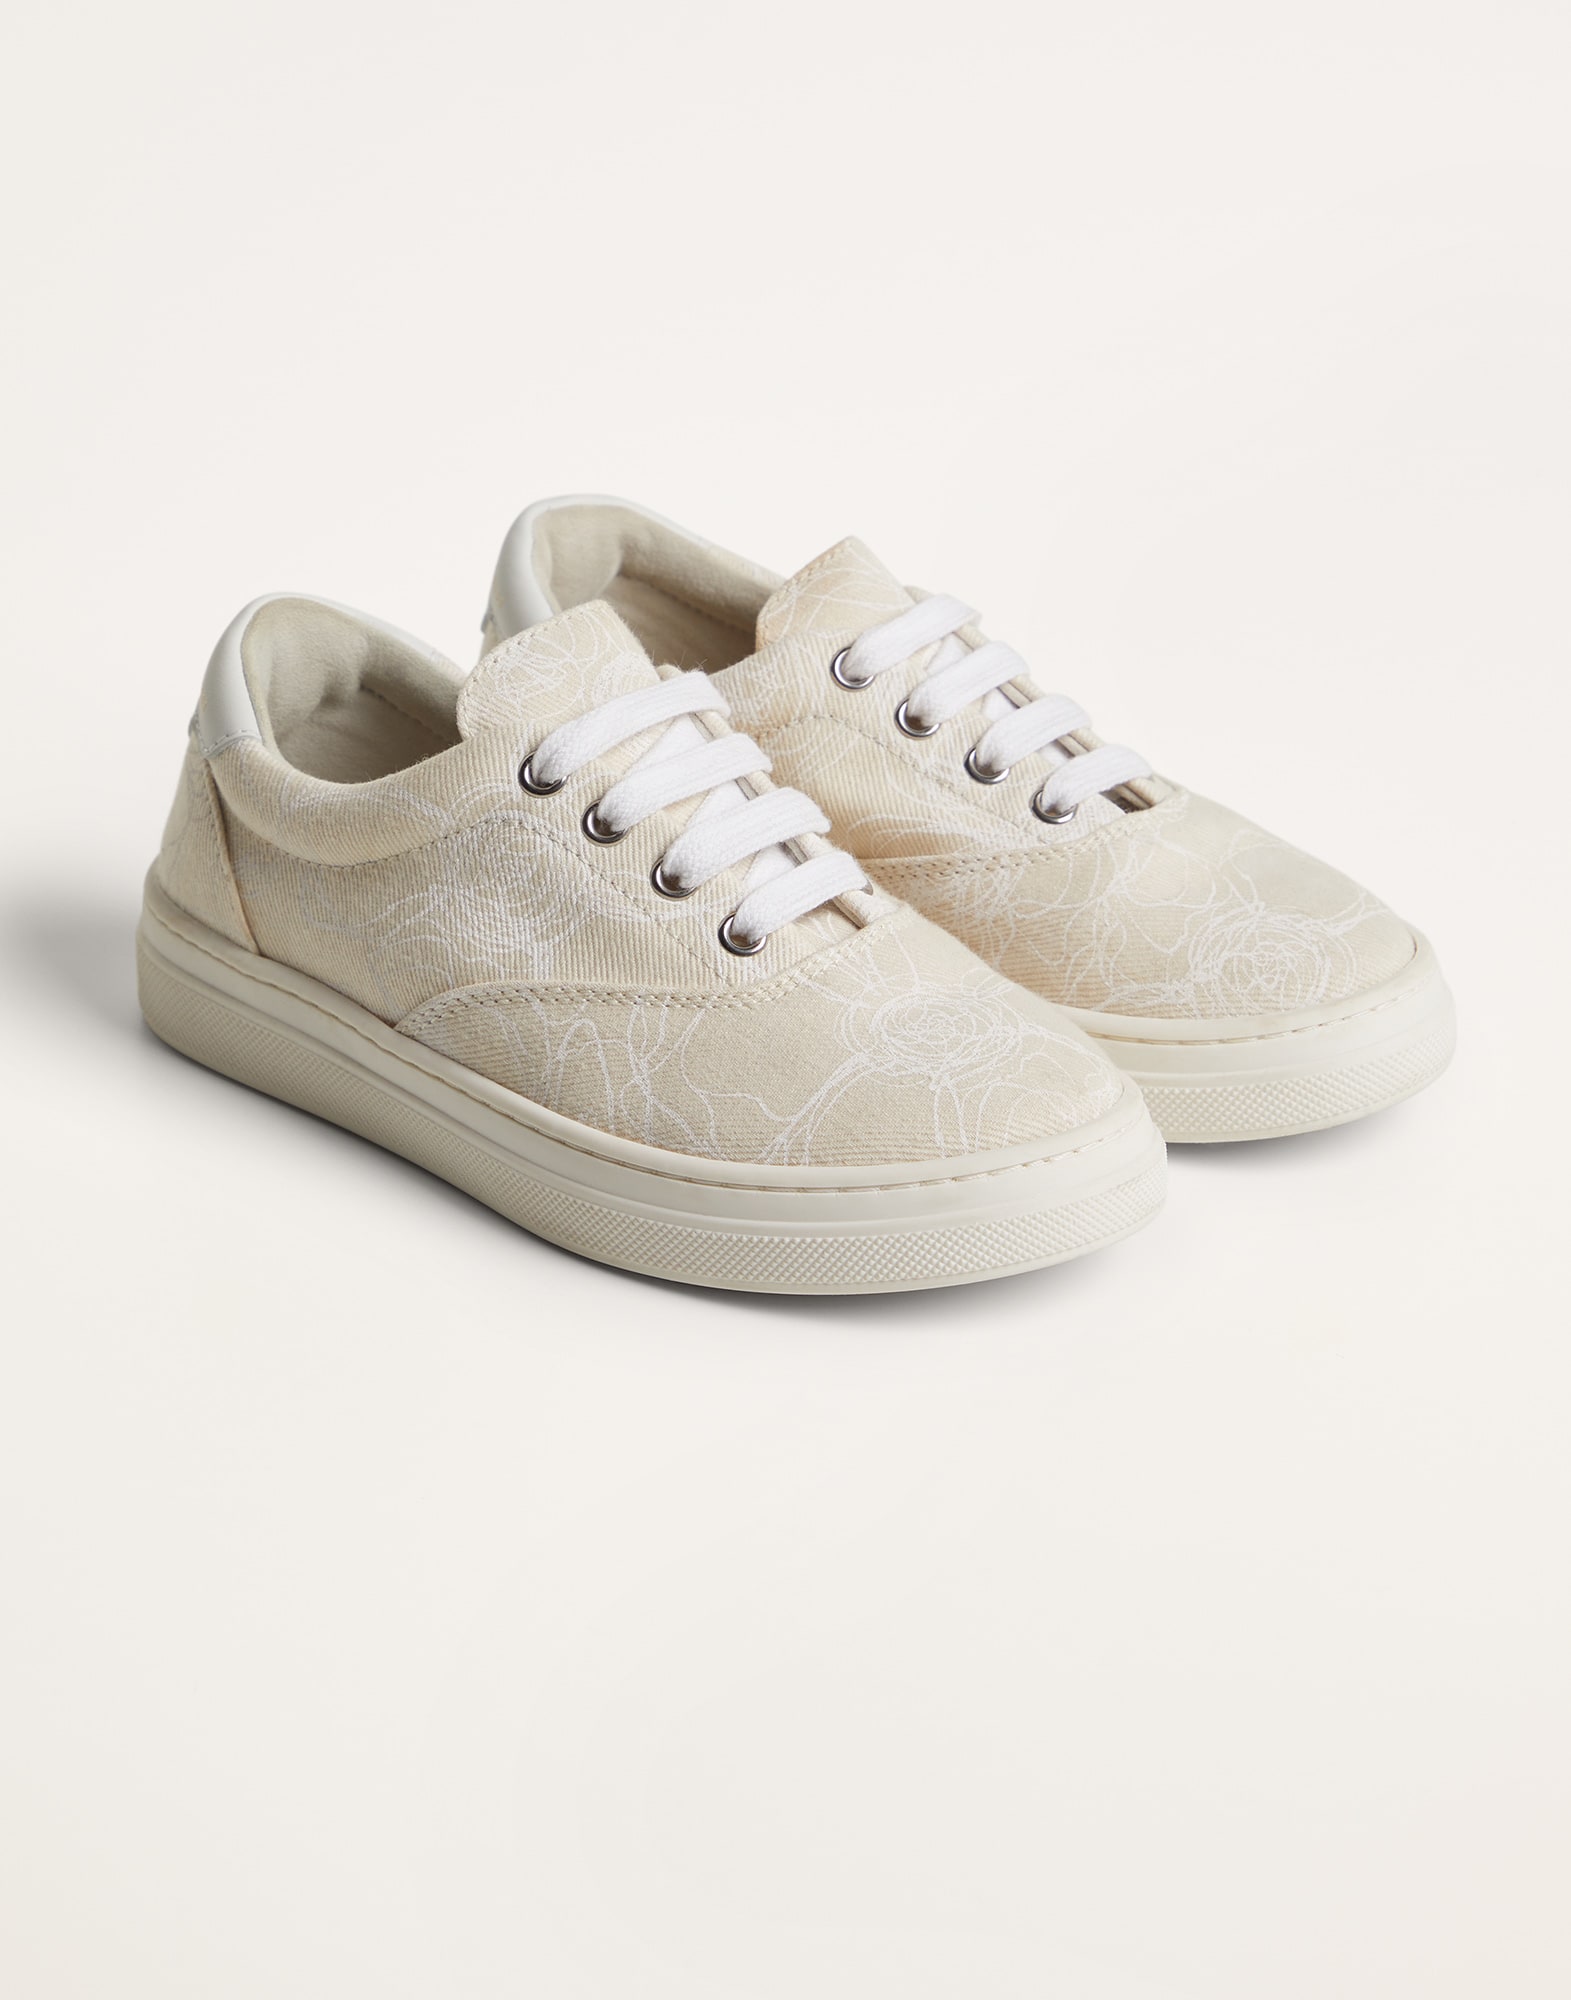 Cotton drill sneakers